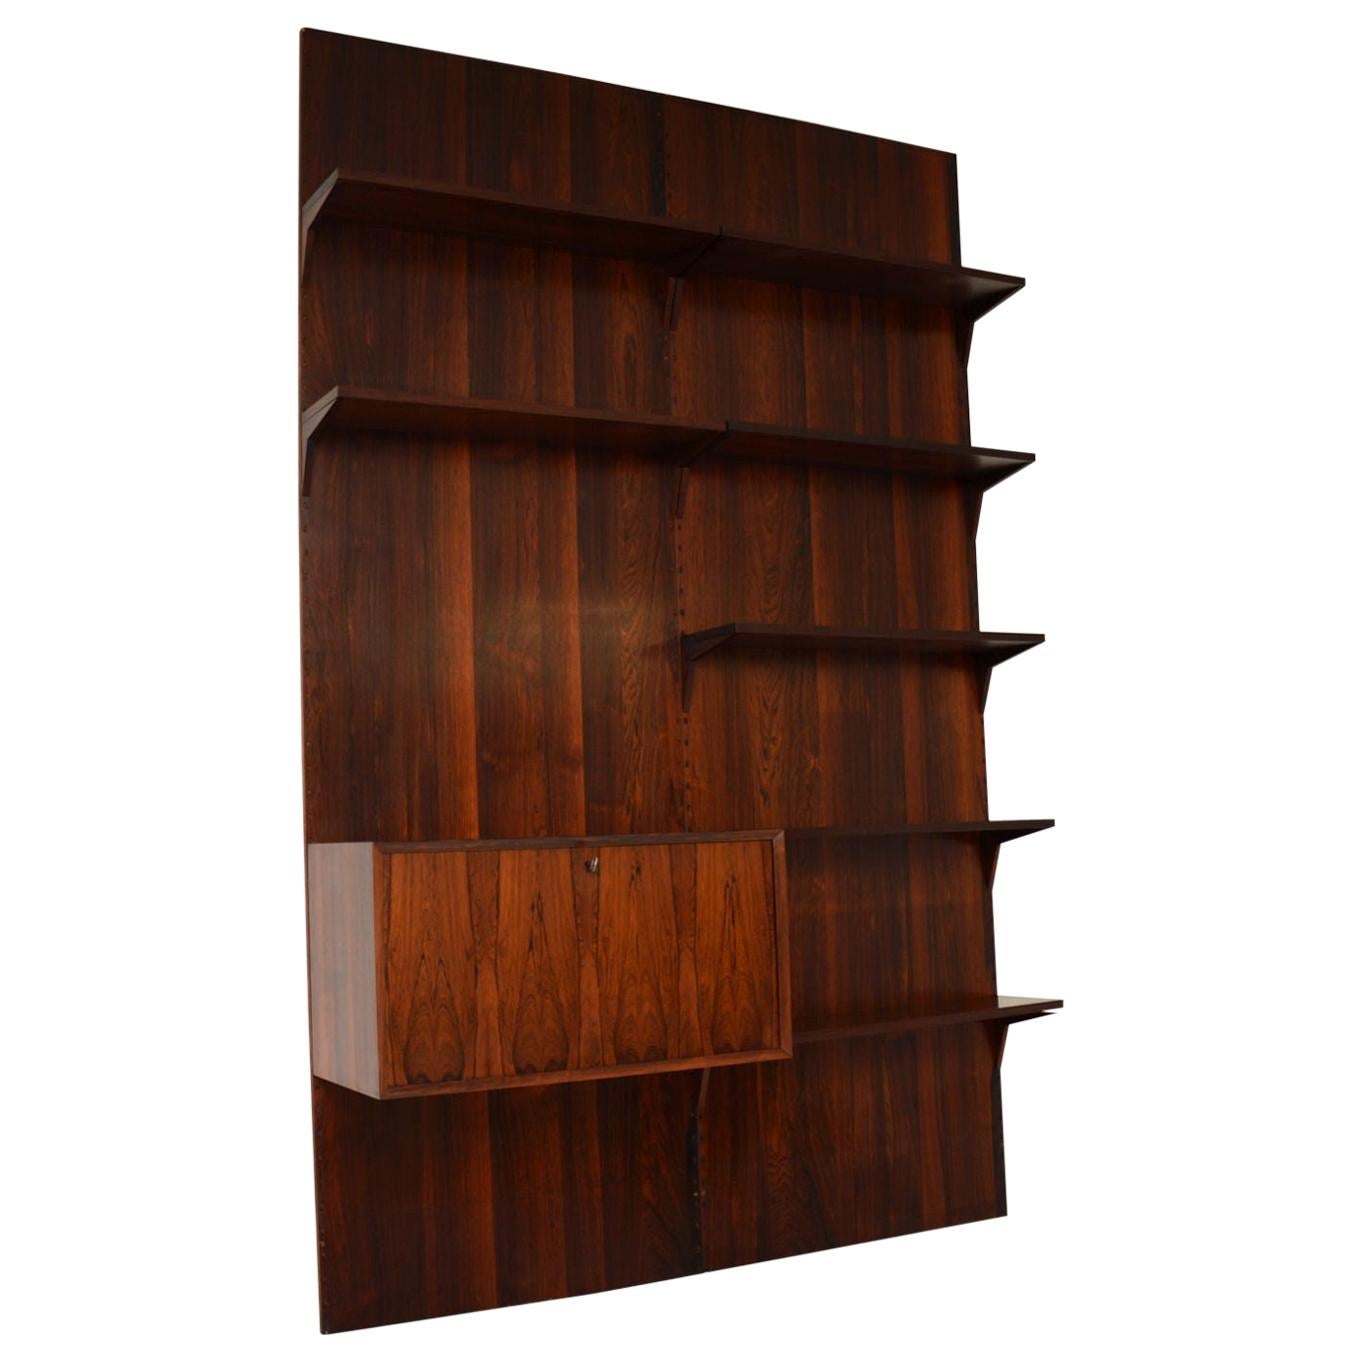 1960’s Danish Royal Shelving System by Poul Cadovius